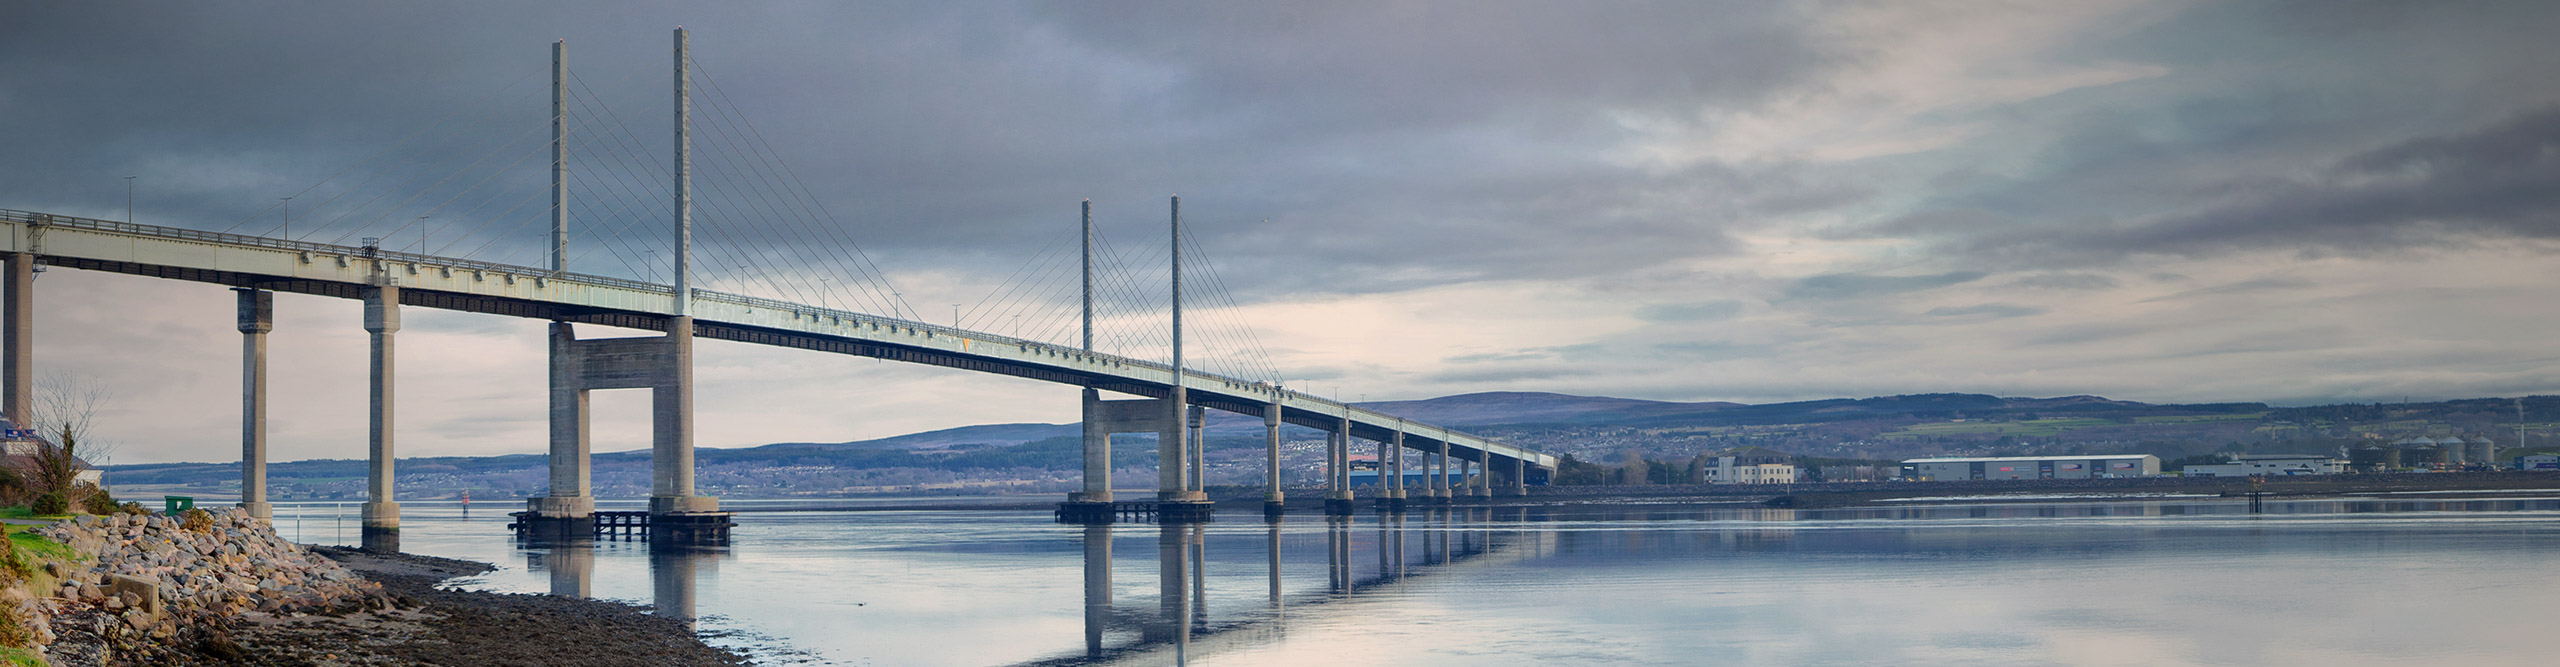 Cable-stayed bridge across the Beauty Firth, an inlet of the Moray Firth, Scottish Highlands.